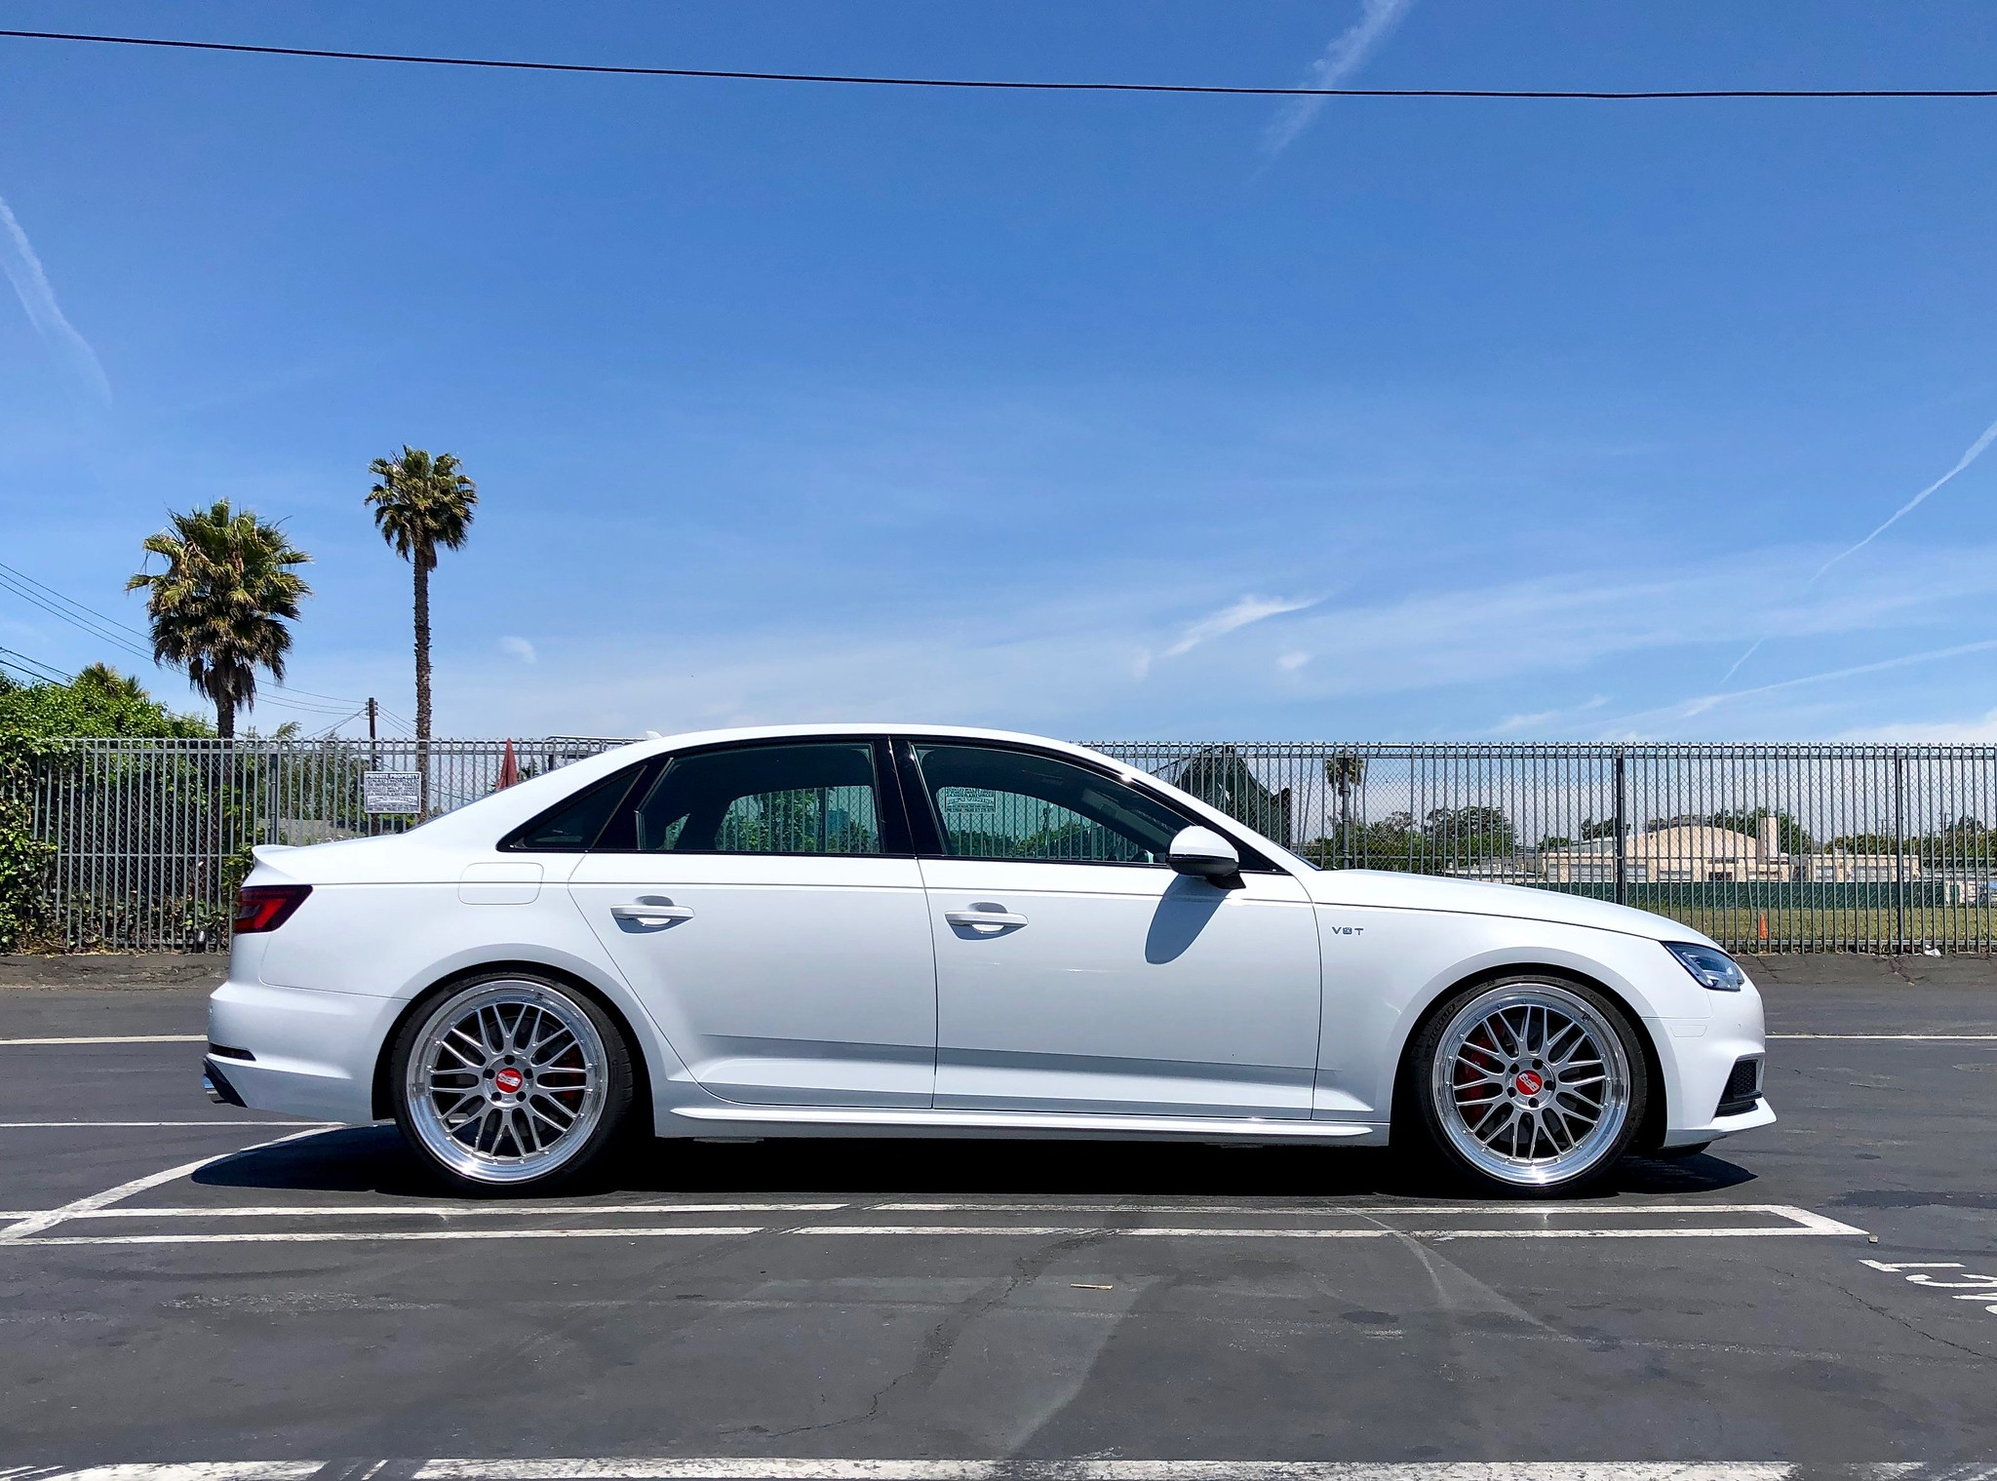 2018 Audi S4 - B9 S4 Part Out - Wheels/Tires, AWE Touring Exhaust, & KW HAS Springs - Los Angeles, CA 90066, United States